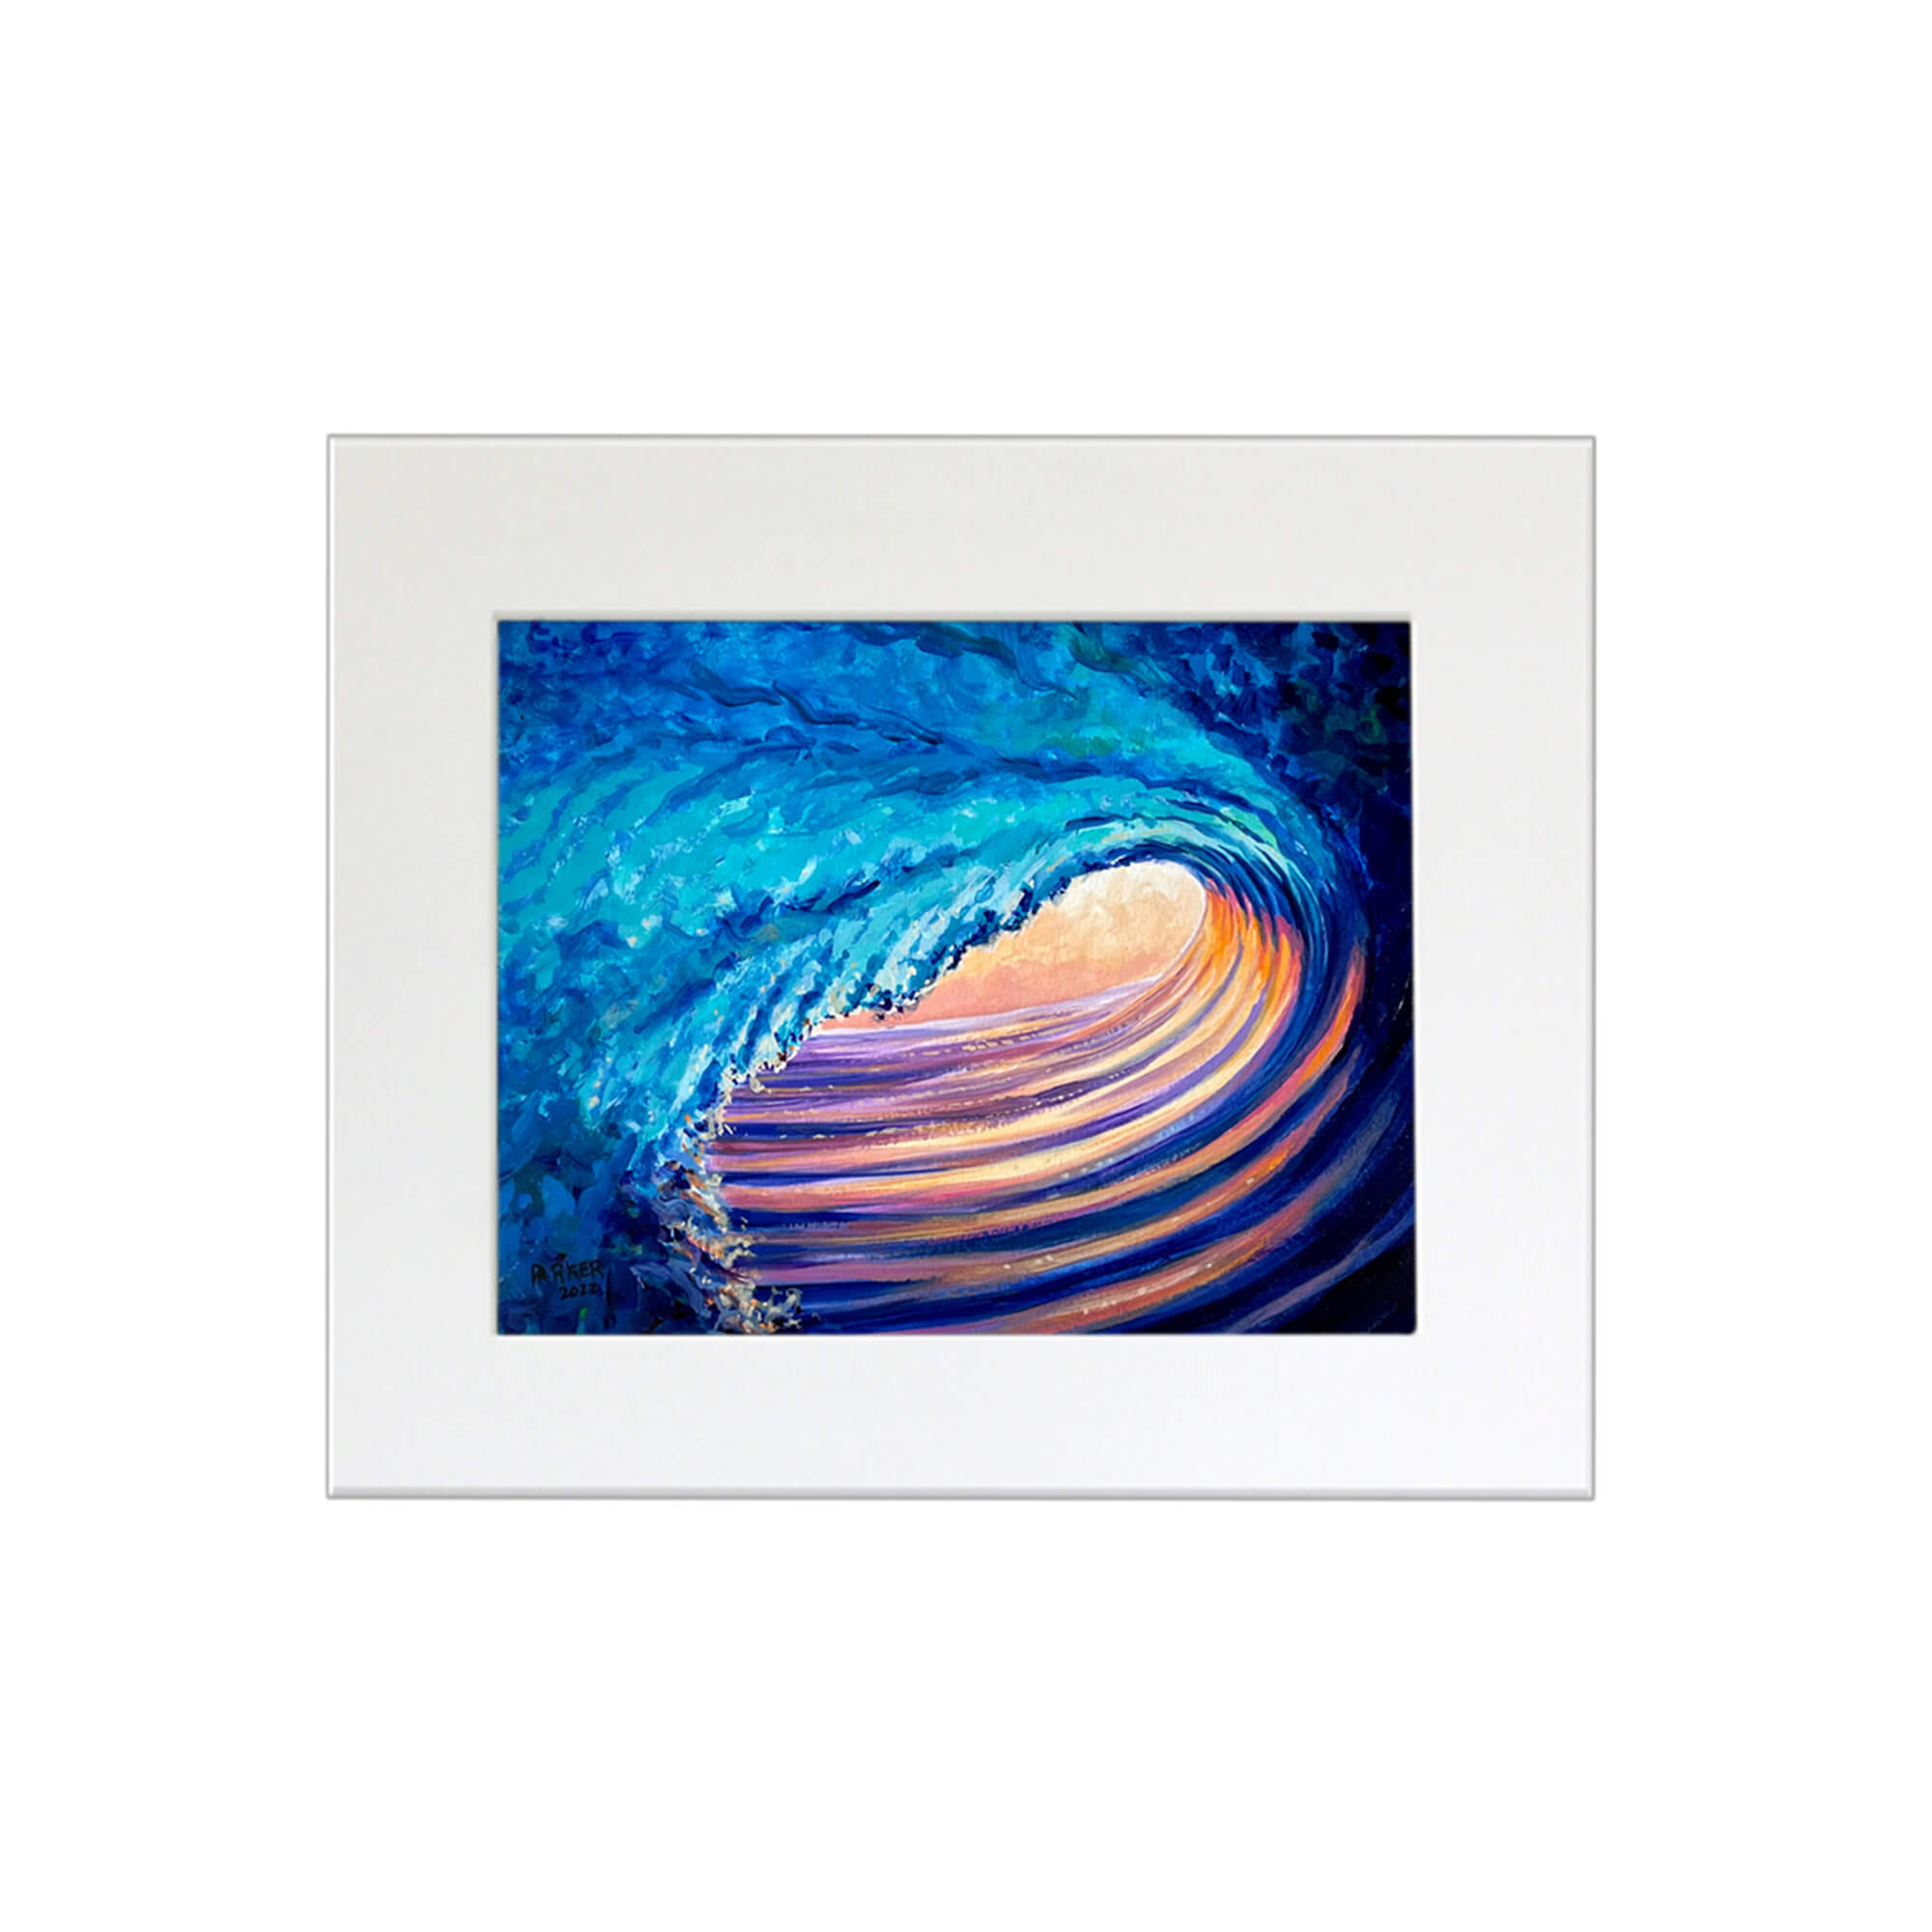 Original painting in mat featuring a large crashing blue barrel wave with purple and orange hue by Maui artist Patrick Parker